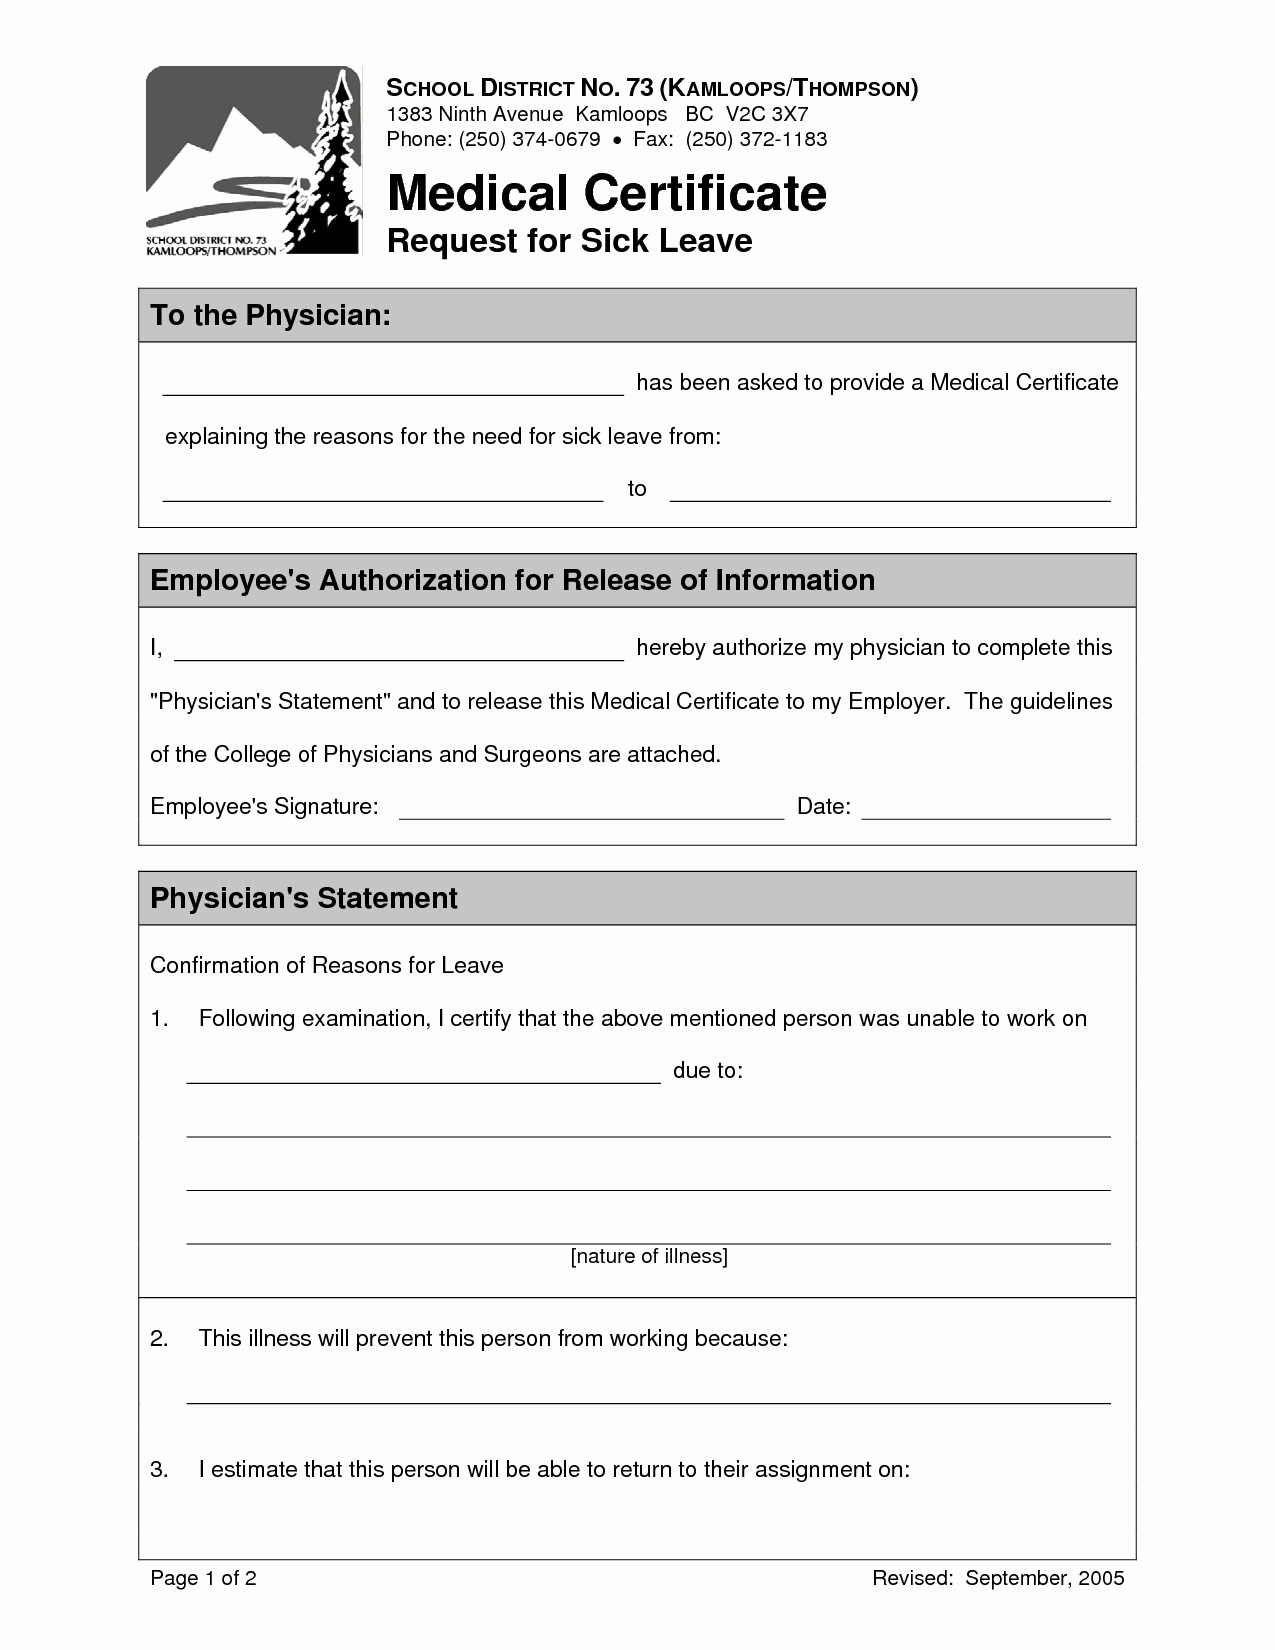 Sick Leave form Template Luxury 19 Medical Certificate Templates for Leave Pdf Docs